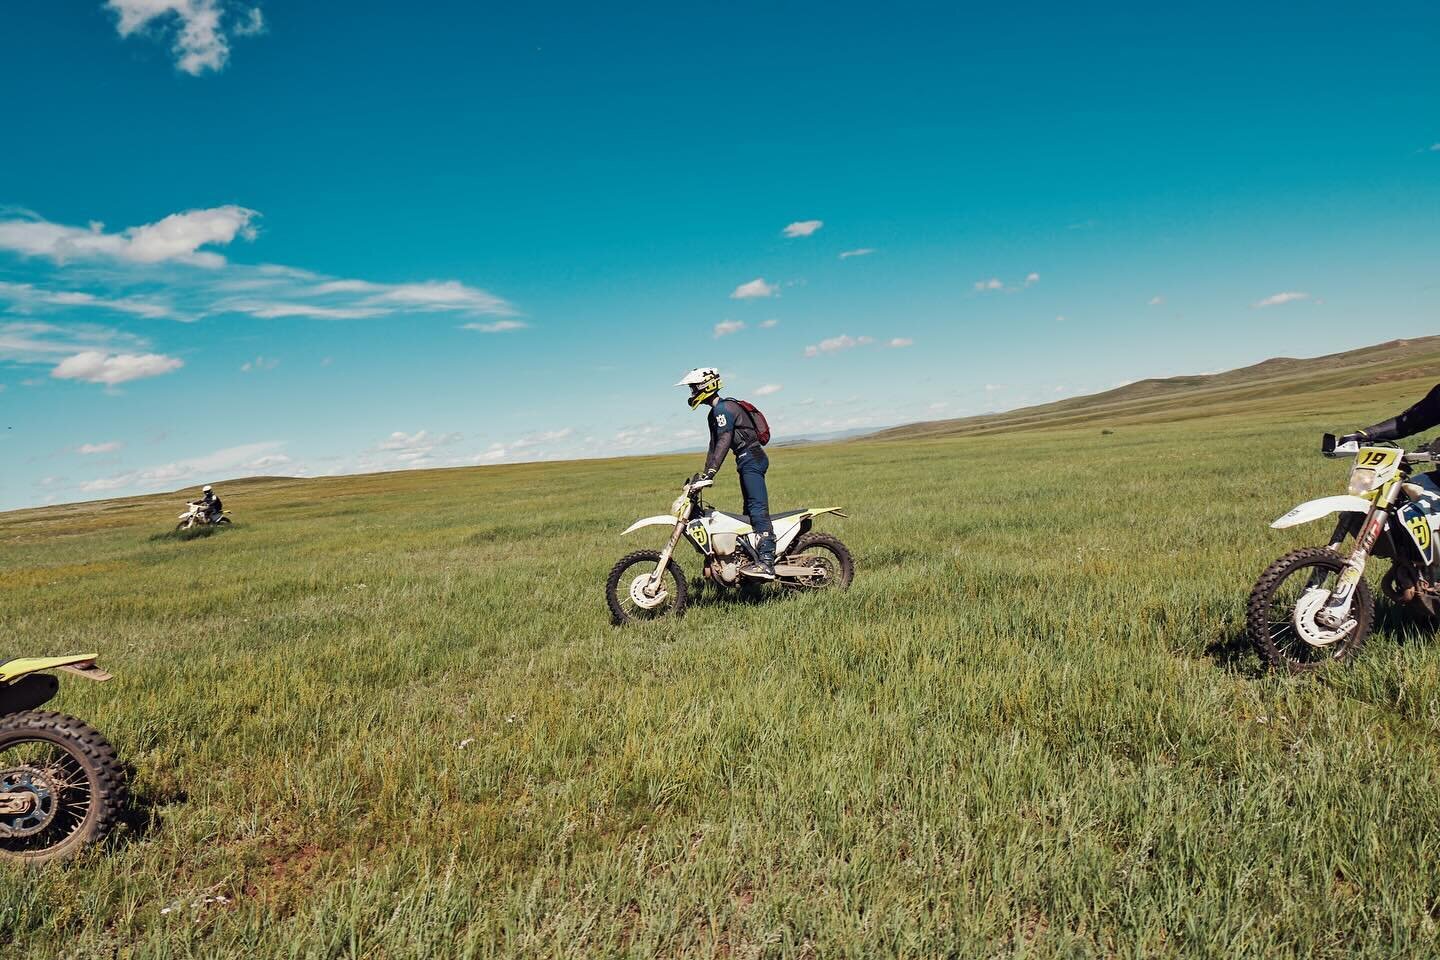 Endless freedom &amp; nomadic culture at its very best. 🇲🇳 Unique Mongolia welcomes riders from all over the world who are seeking the ultimate adventure. 

Only TWO REMAINING WEEKS for our 2025 early bird rates, 10% off for bookings reaching us by